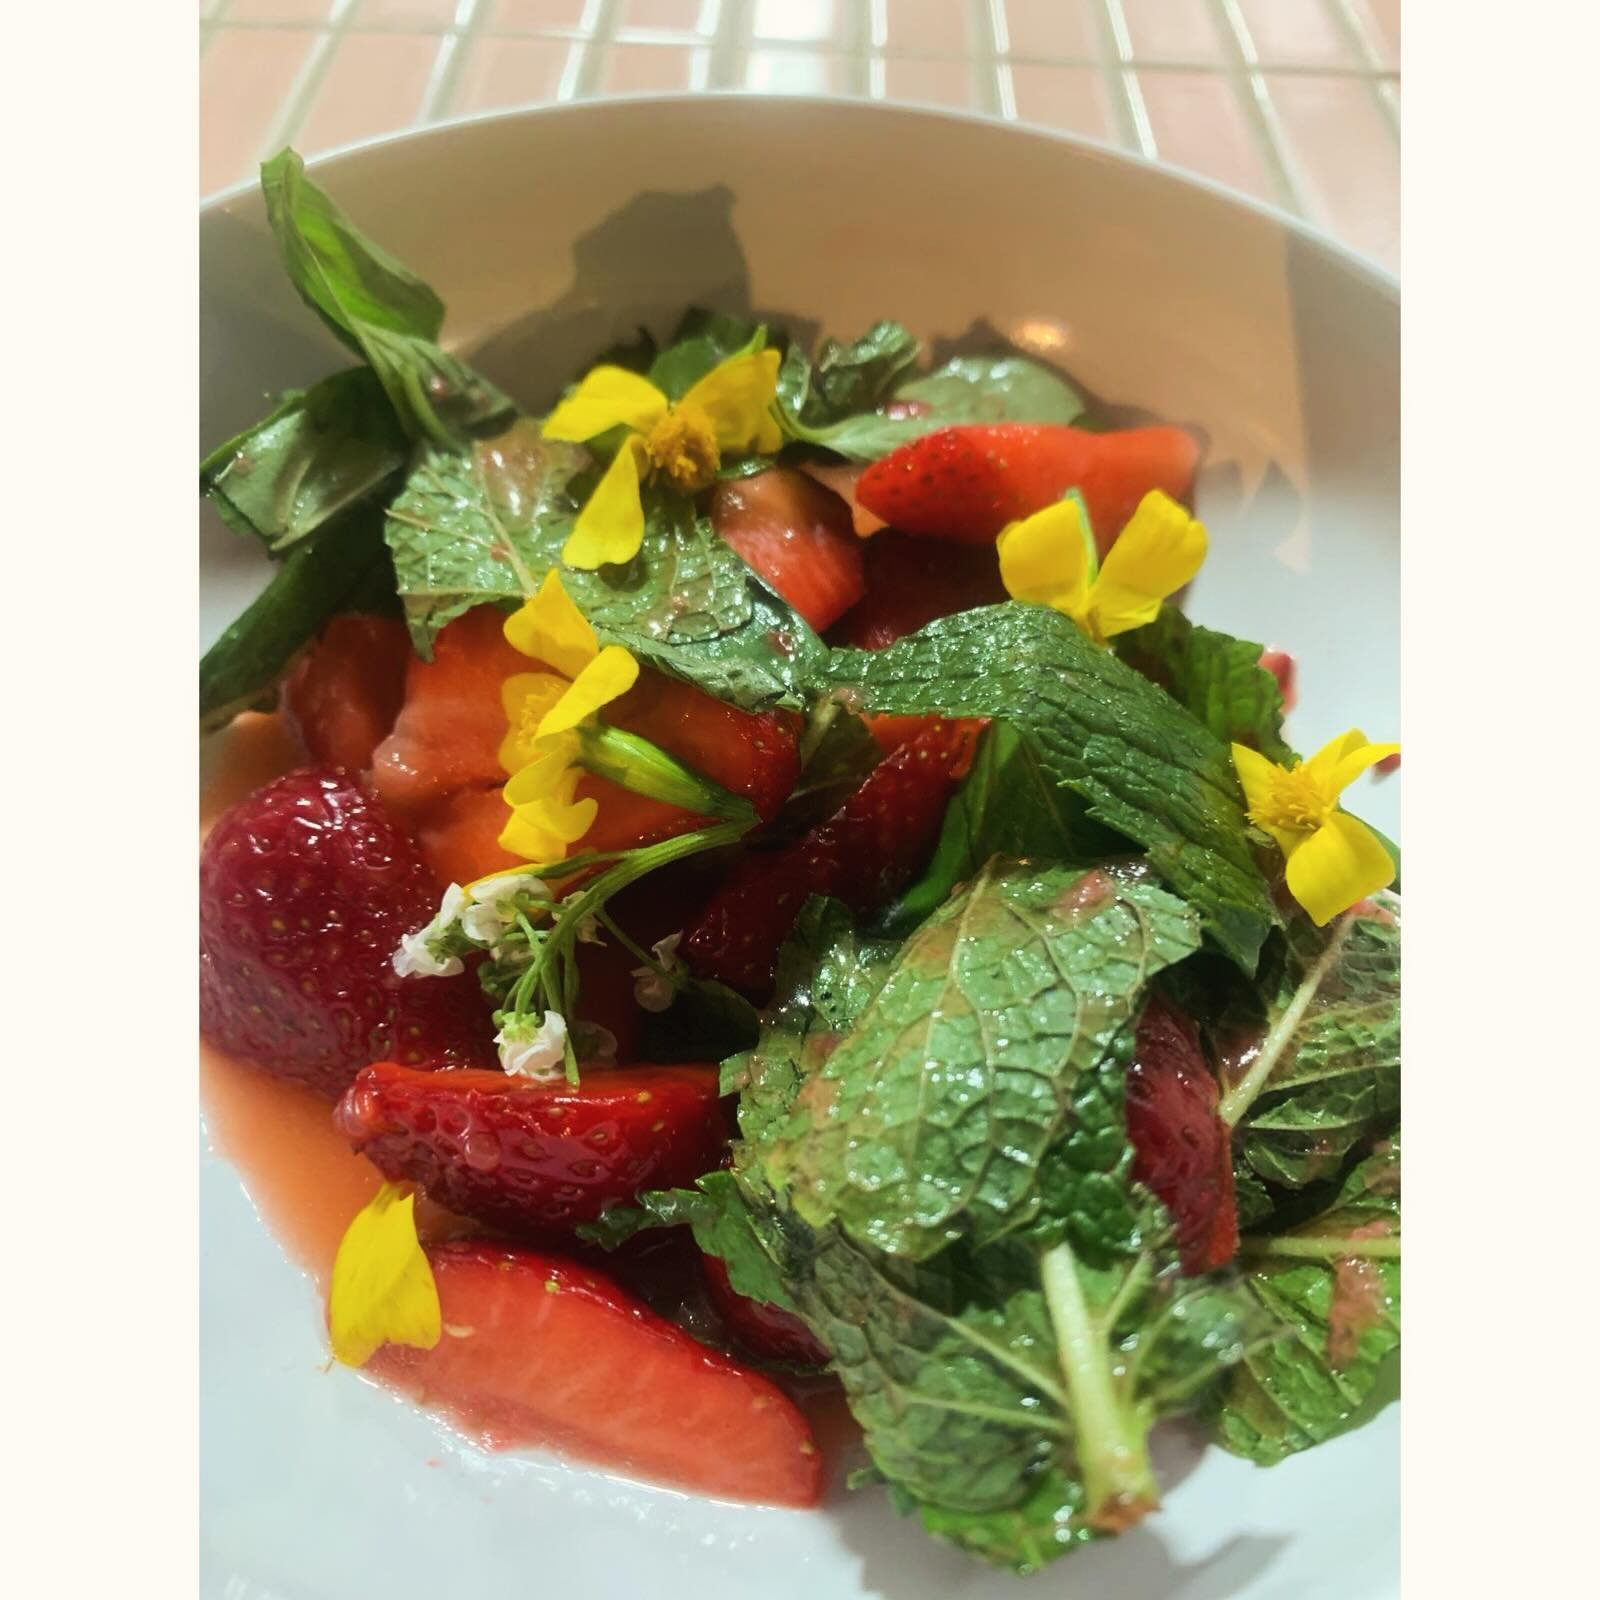 Our strawberry salad with basil and mint! In our wild garlic fermentation process there&rsquo;s a lot of lacto fermented liquid that occurs as a byproduct of the process, that goes into our dressing with a few crushed up extra ripe strawberries, maki